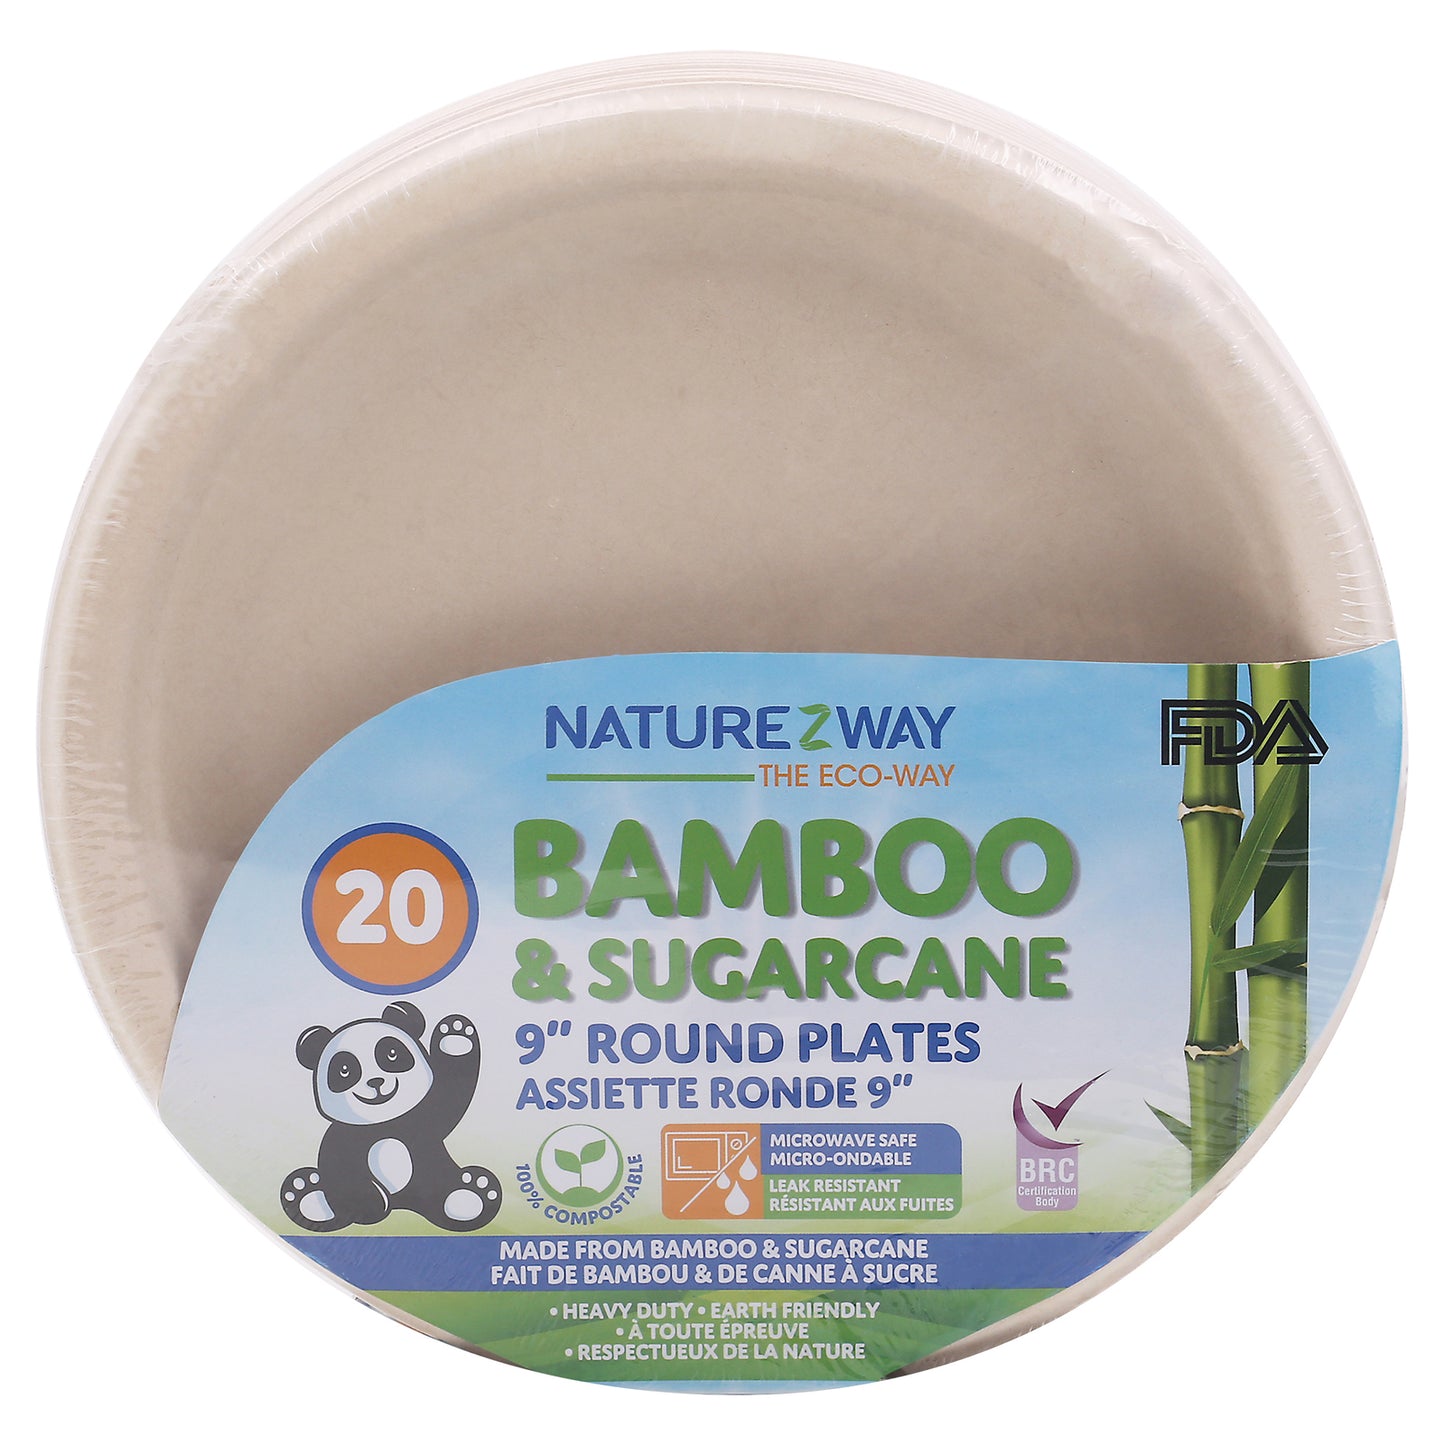 Naturezway - Plate Bmboo Rnd 9in 20ct - Case Of 12-20 Ct